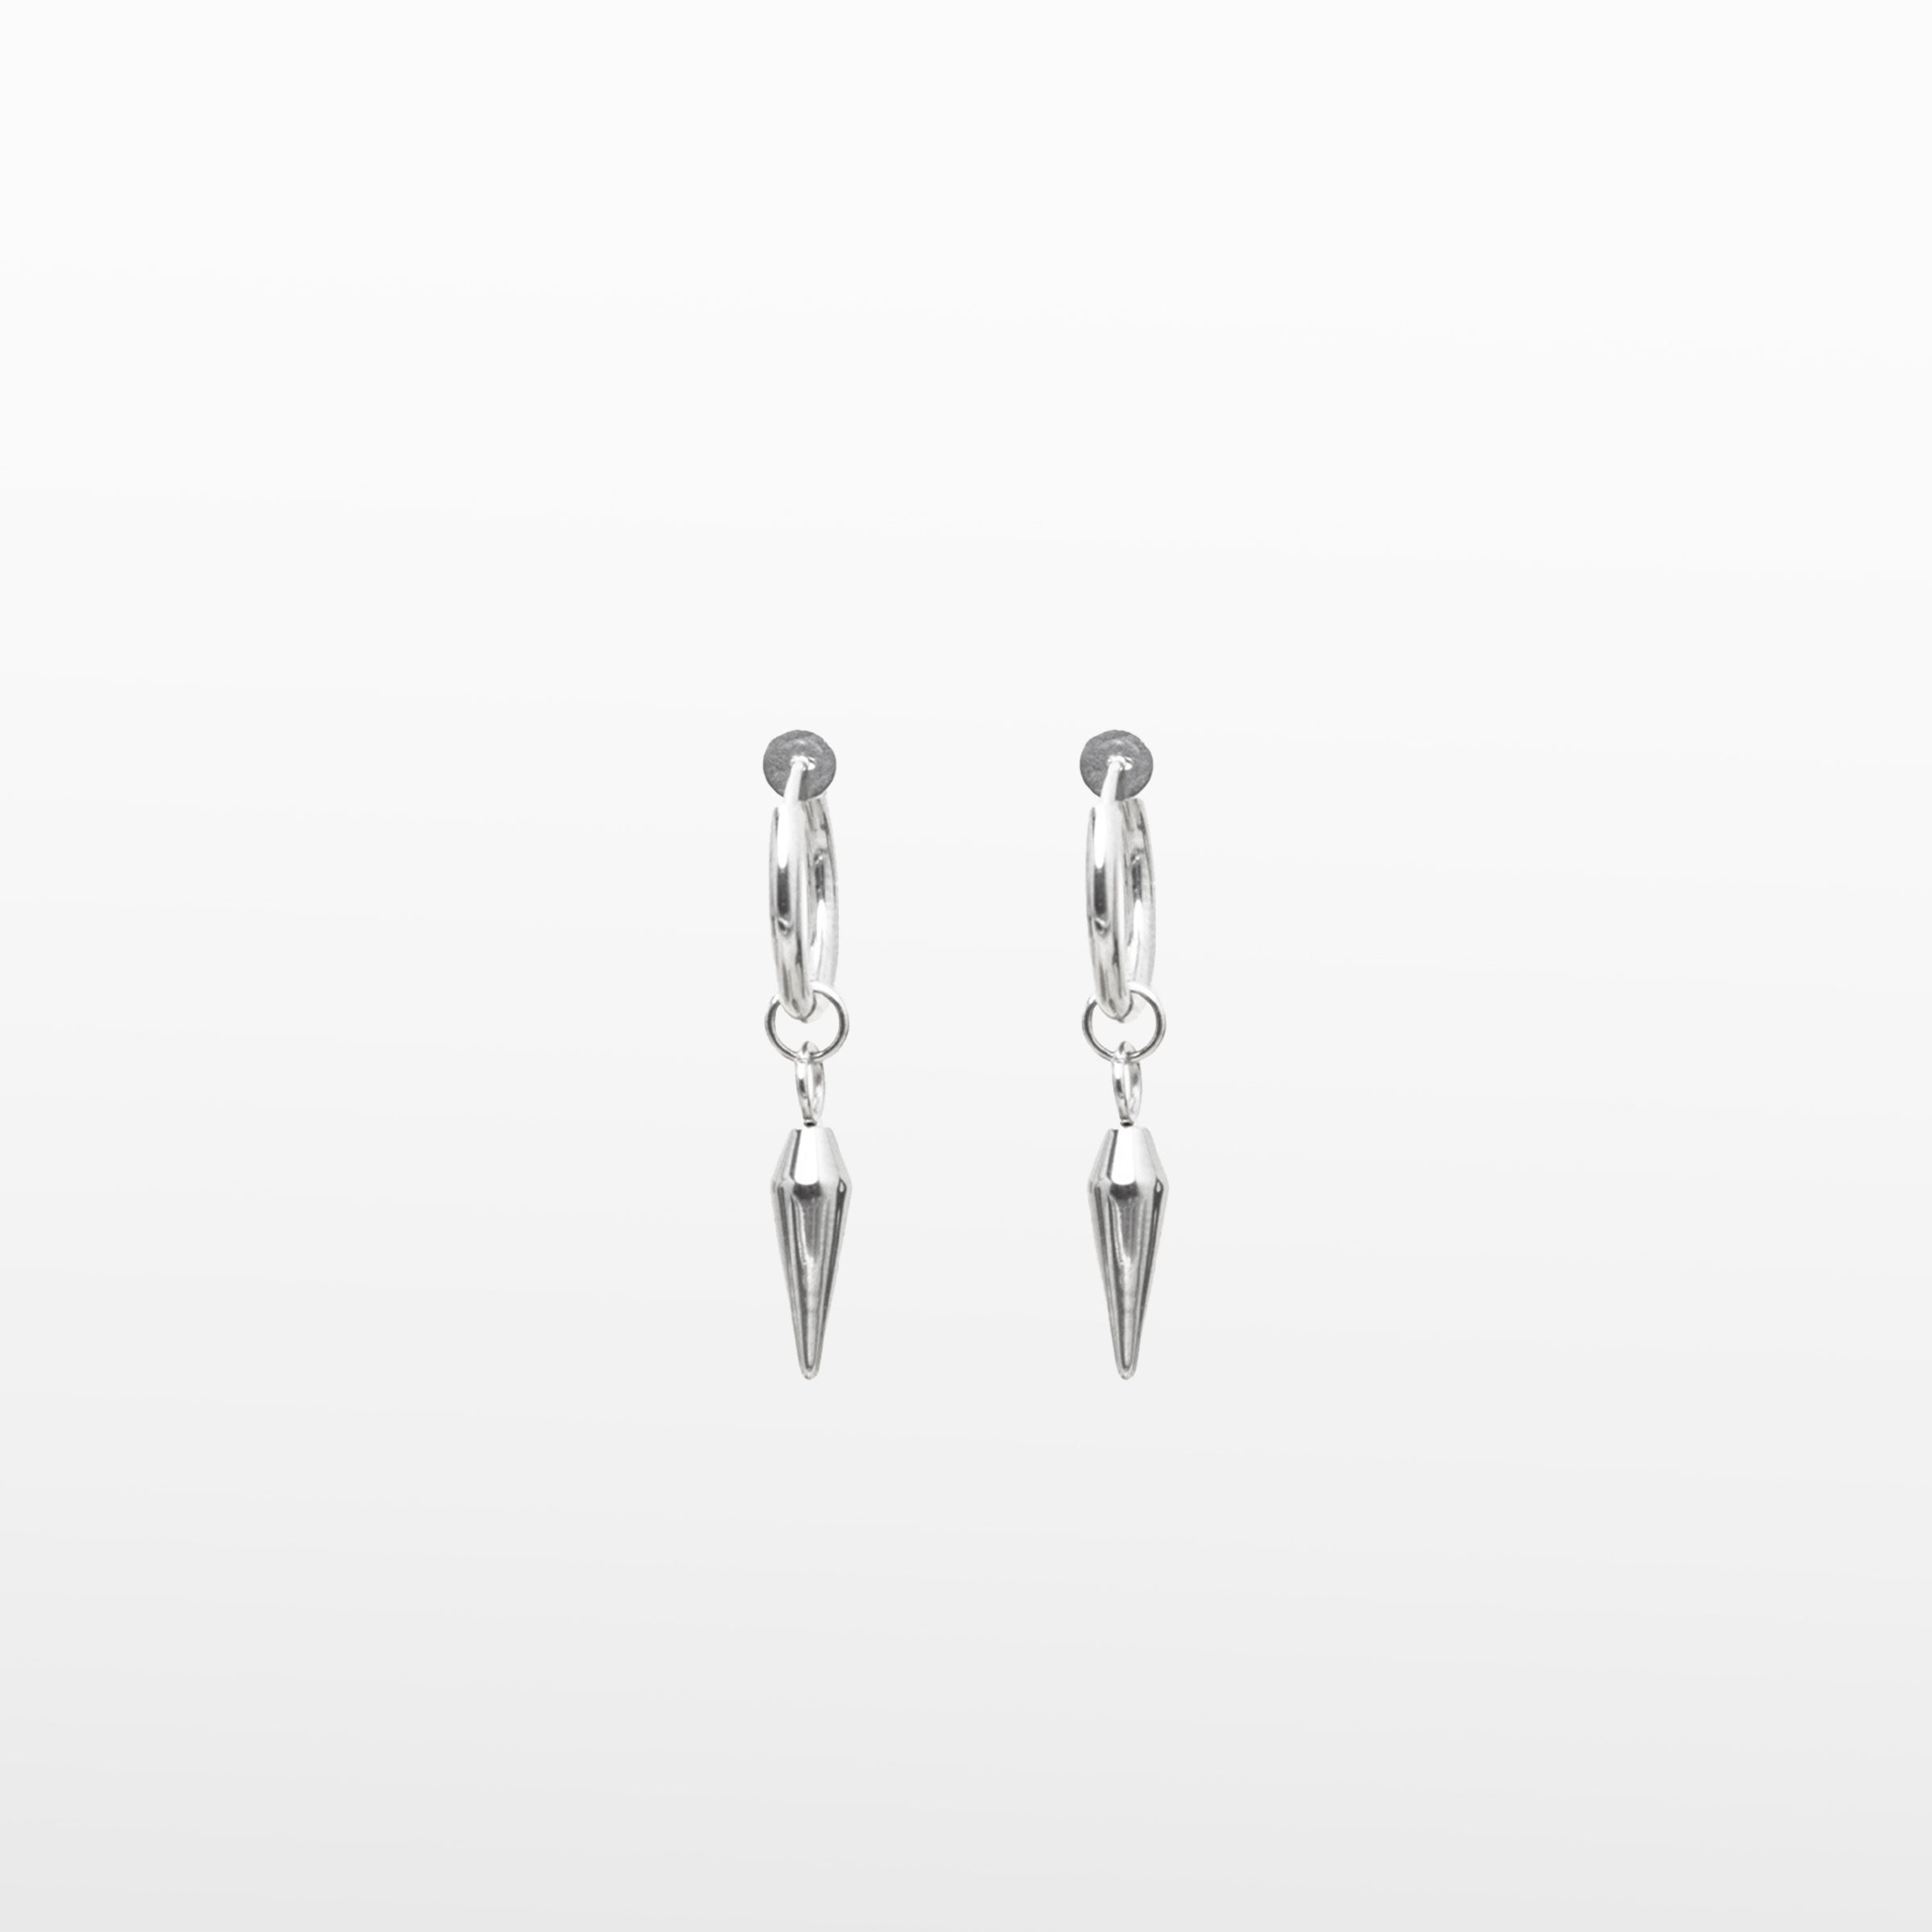 Image of the Dagger Clip On Earrings feature a sliding spring closure type, making them best suited to those with small or thin ears. The earrings are capable of providing a secure hold for an average of 2-4 hours, and have the ability to adjust automatically to the thickness of your earlobes. Crafted from stainless steel, each pair includes a single set of earrings.